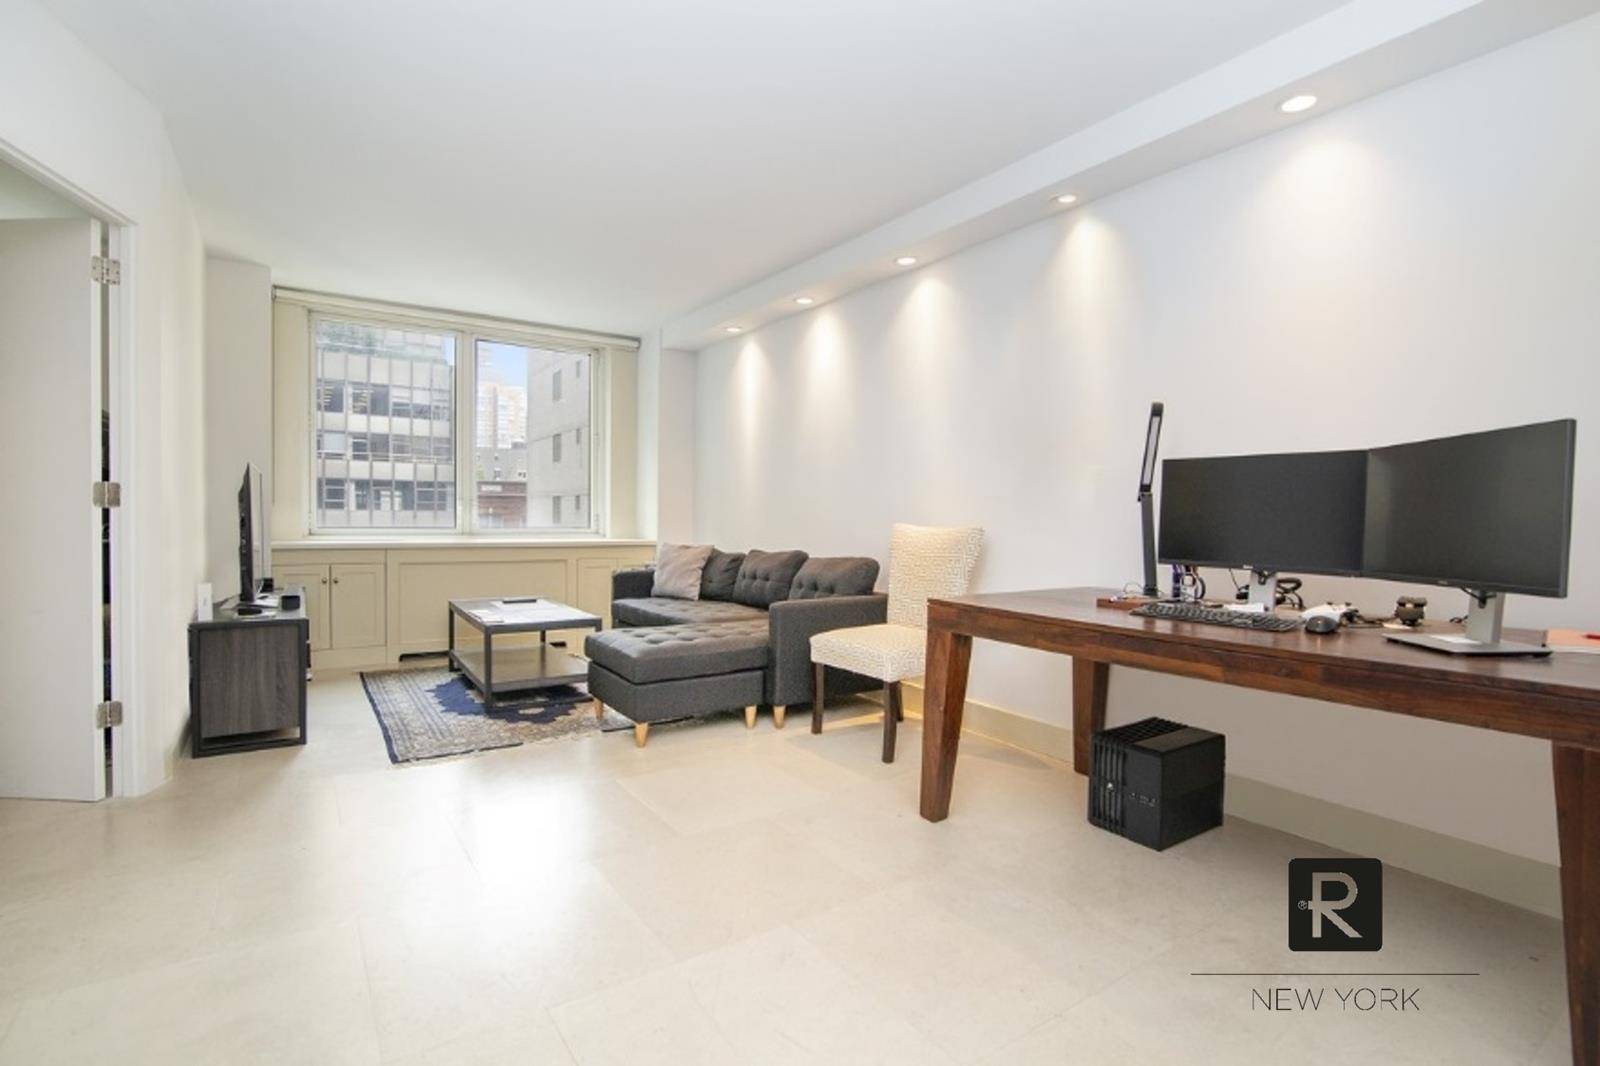 212 EAST 47TH STREET, UNIT 6 D, NEW YORK, NEW YORKGorgeous one bedroom, one bath condominium residence is available for sale at L Ecole, a luxury full service high rise ...